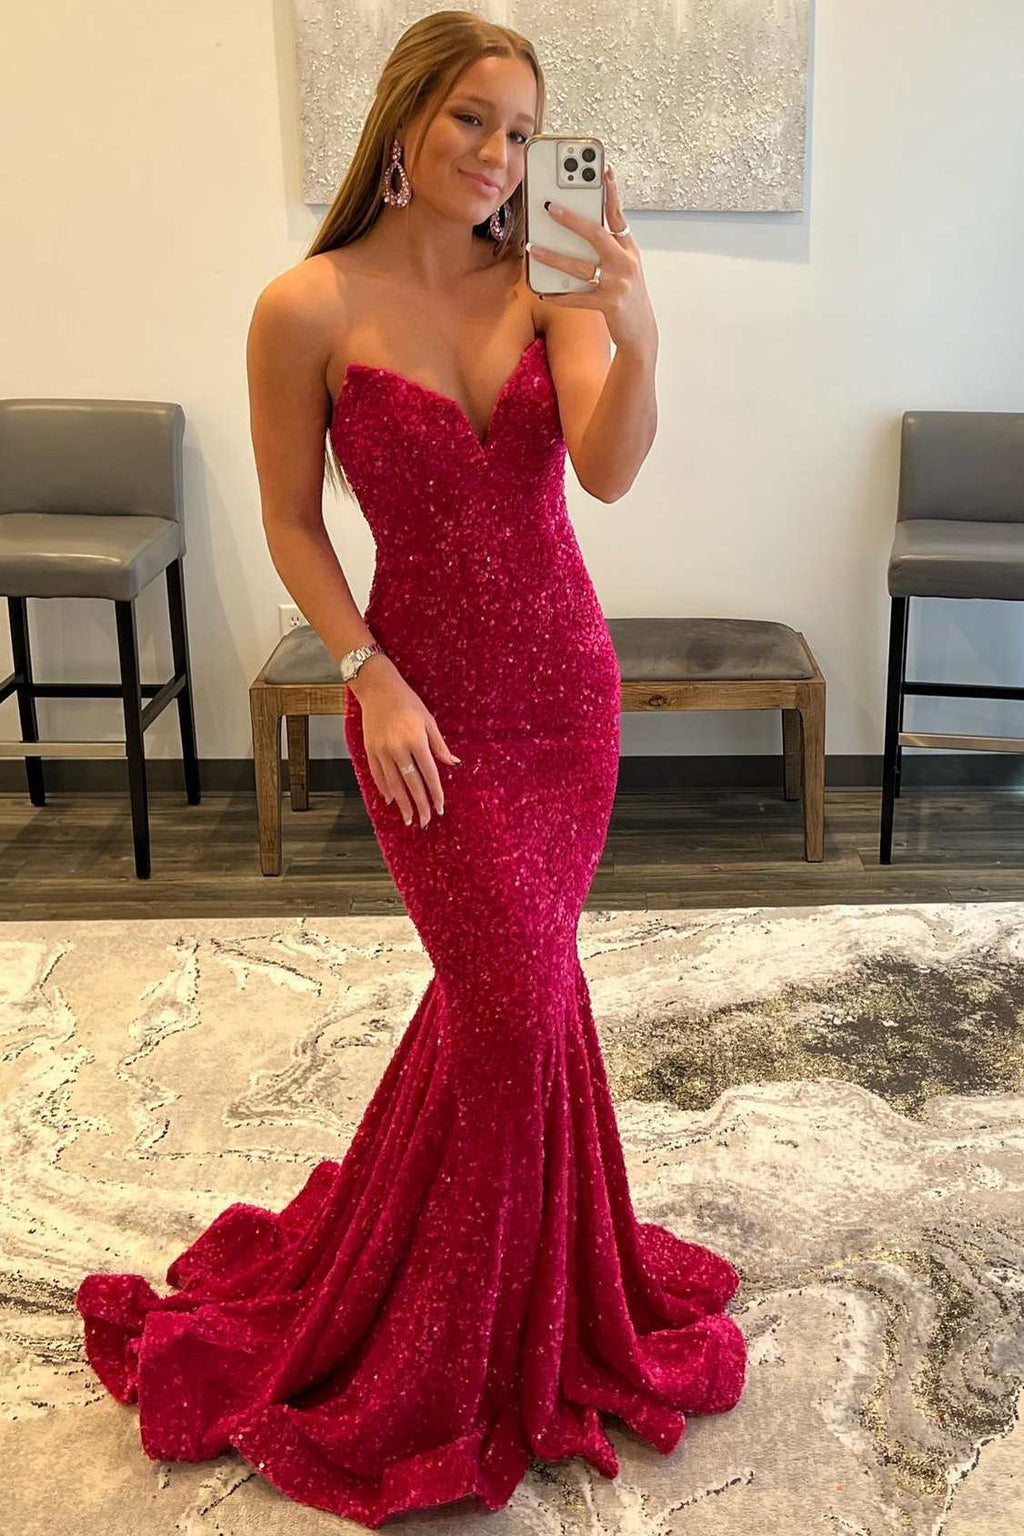 Neon Pink Sequin Strapless Mermaid Long Prom Dress – Dreamdressy